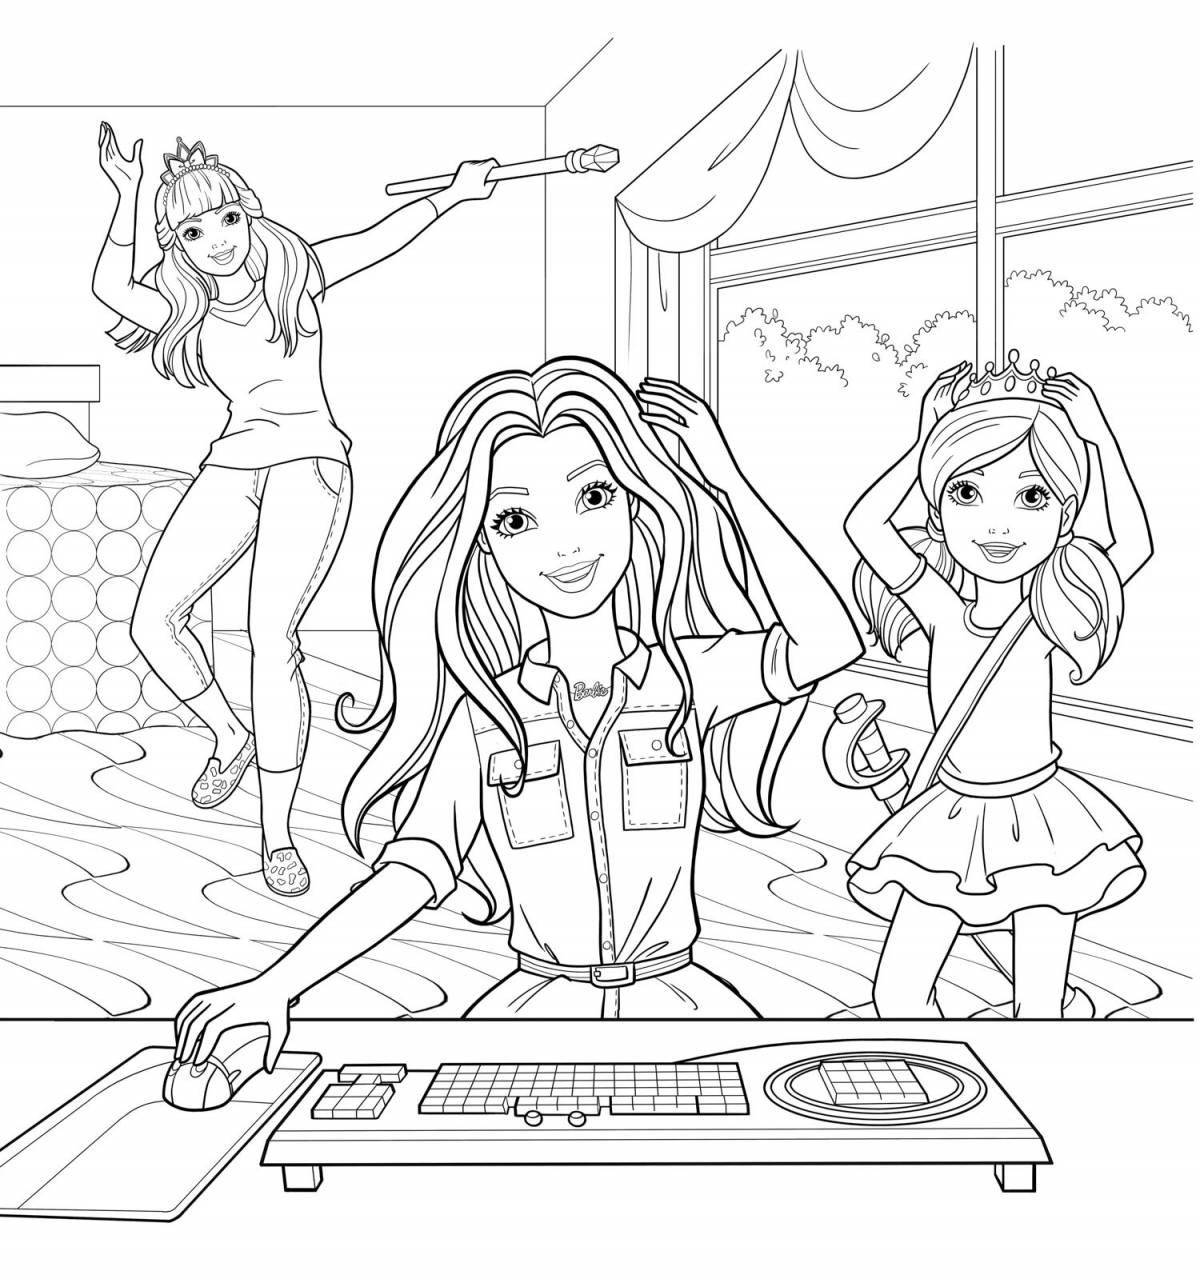 Coloring page adorable barbie house